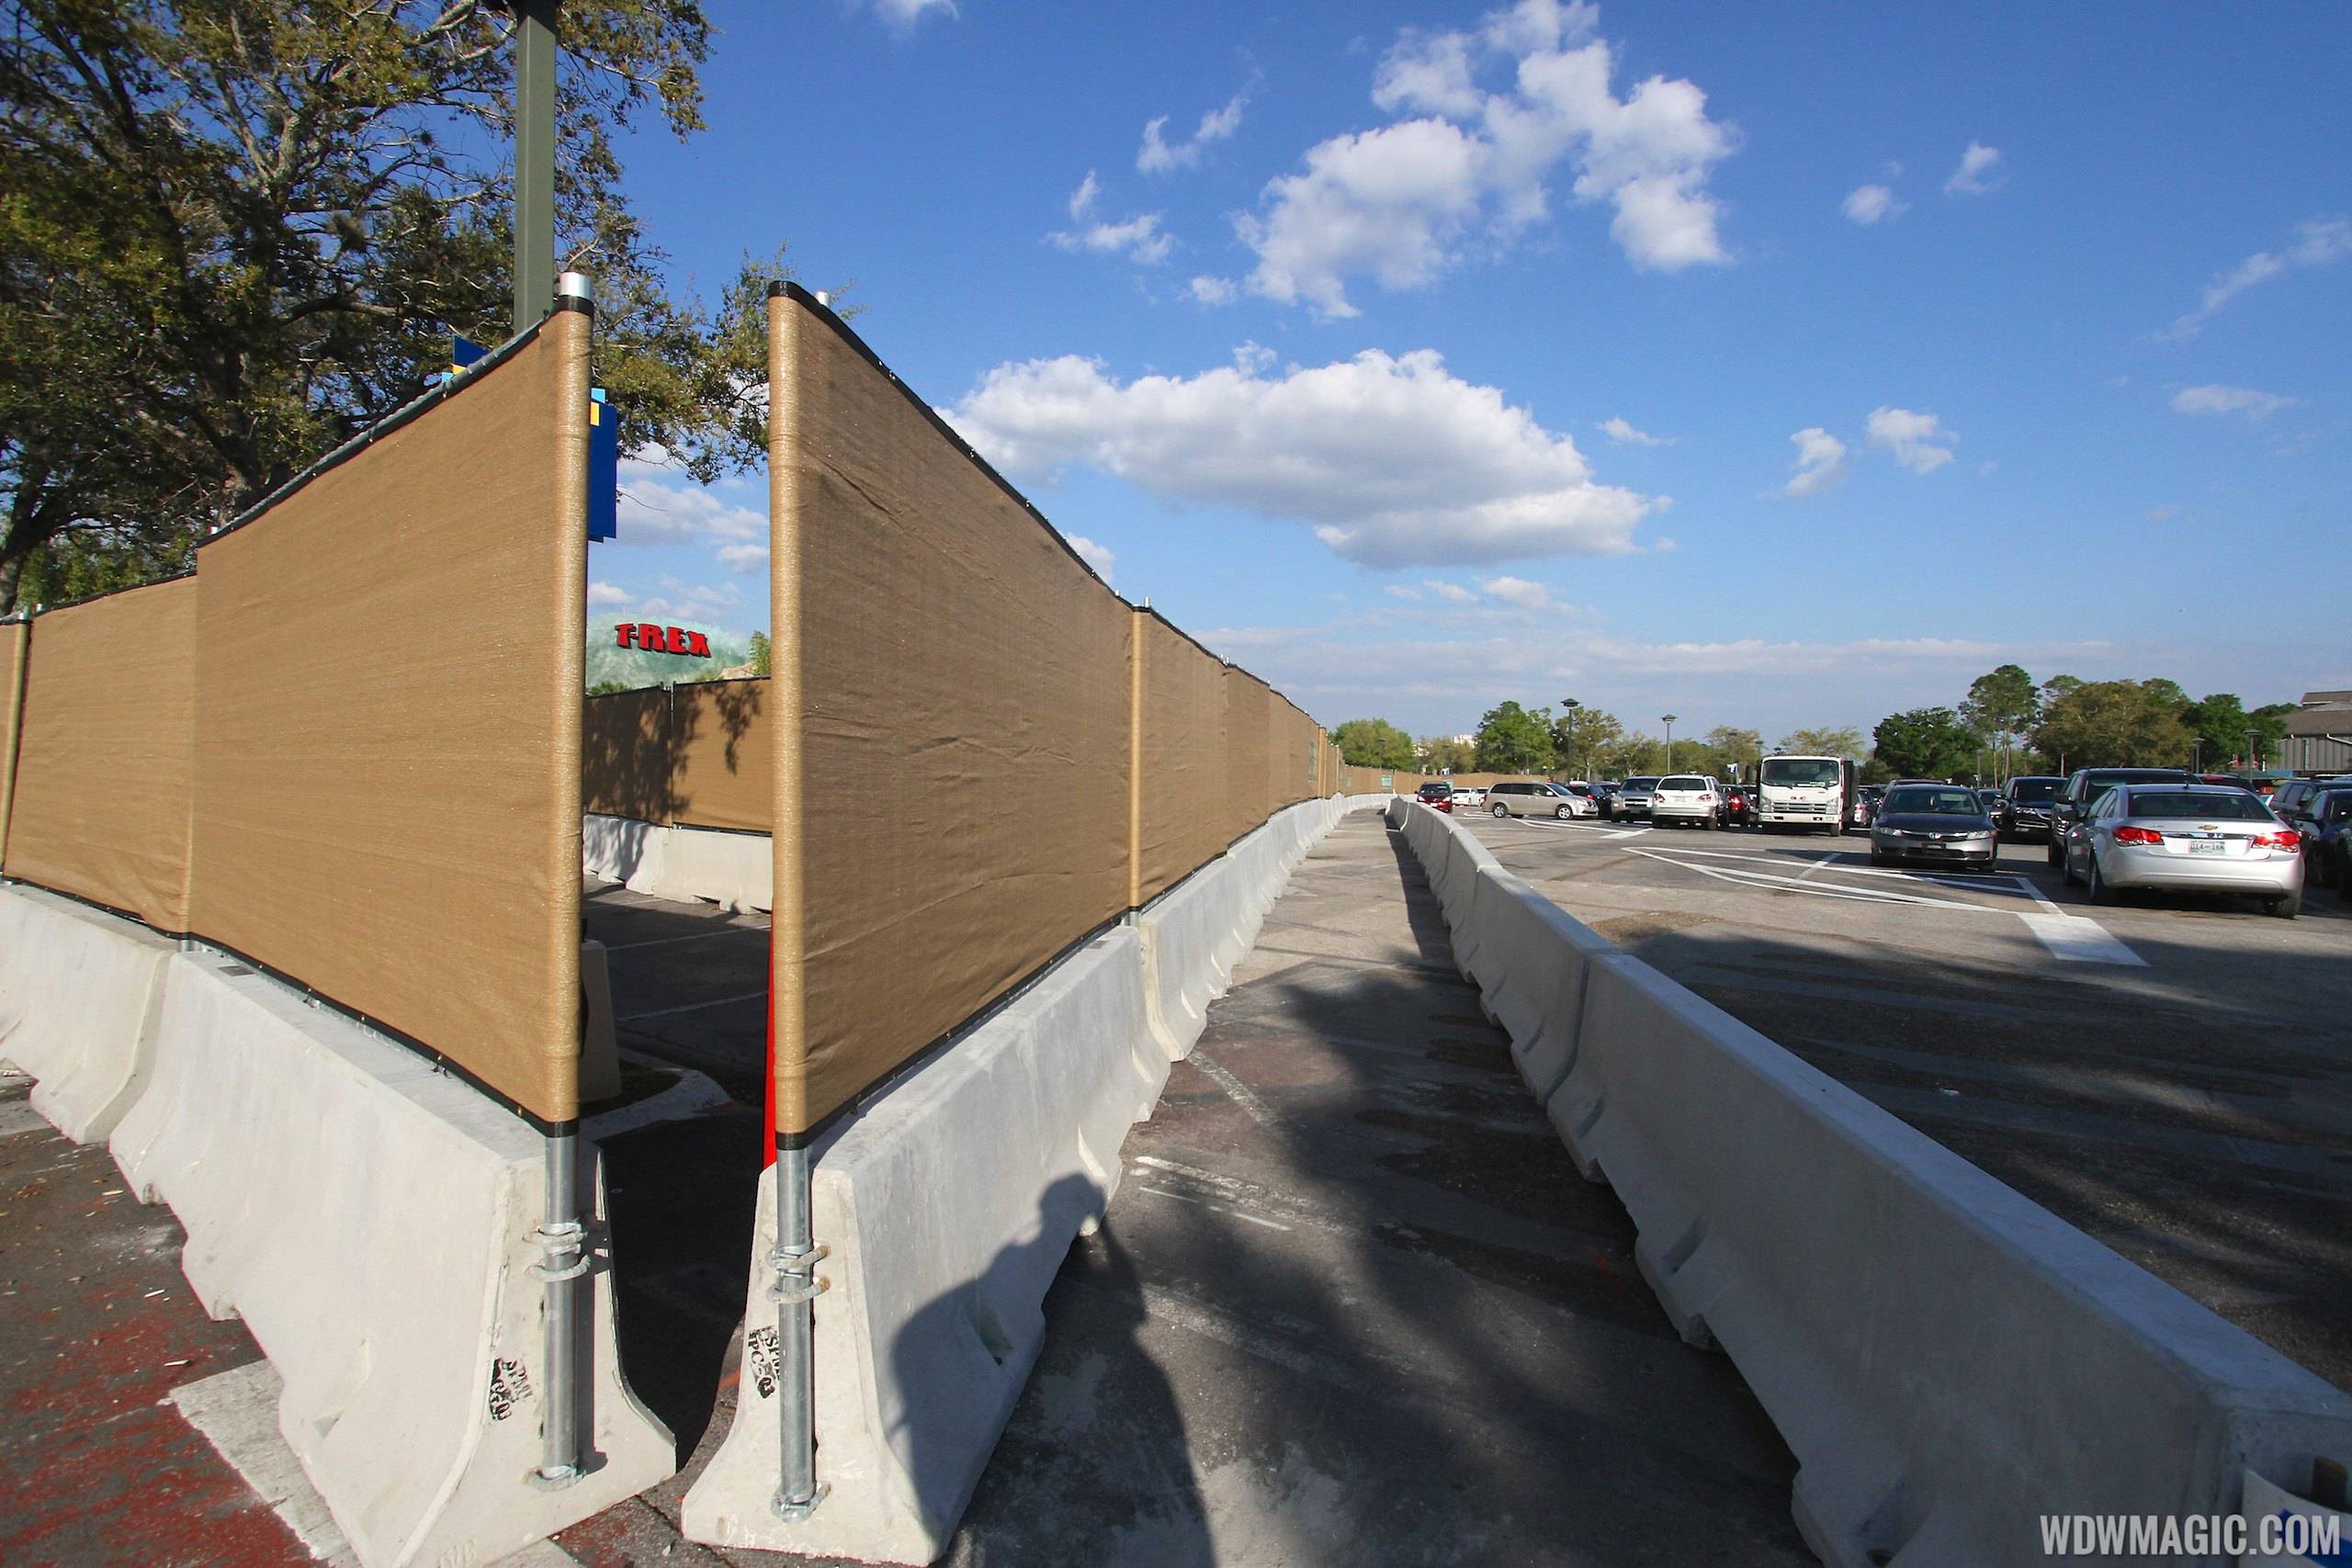 PHOTOS - Construction walls up around the now closed Pollo Campero and parking lots E,F,G